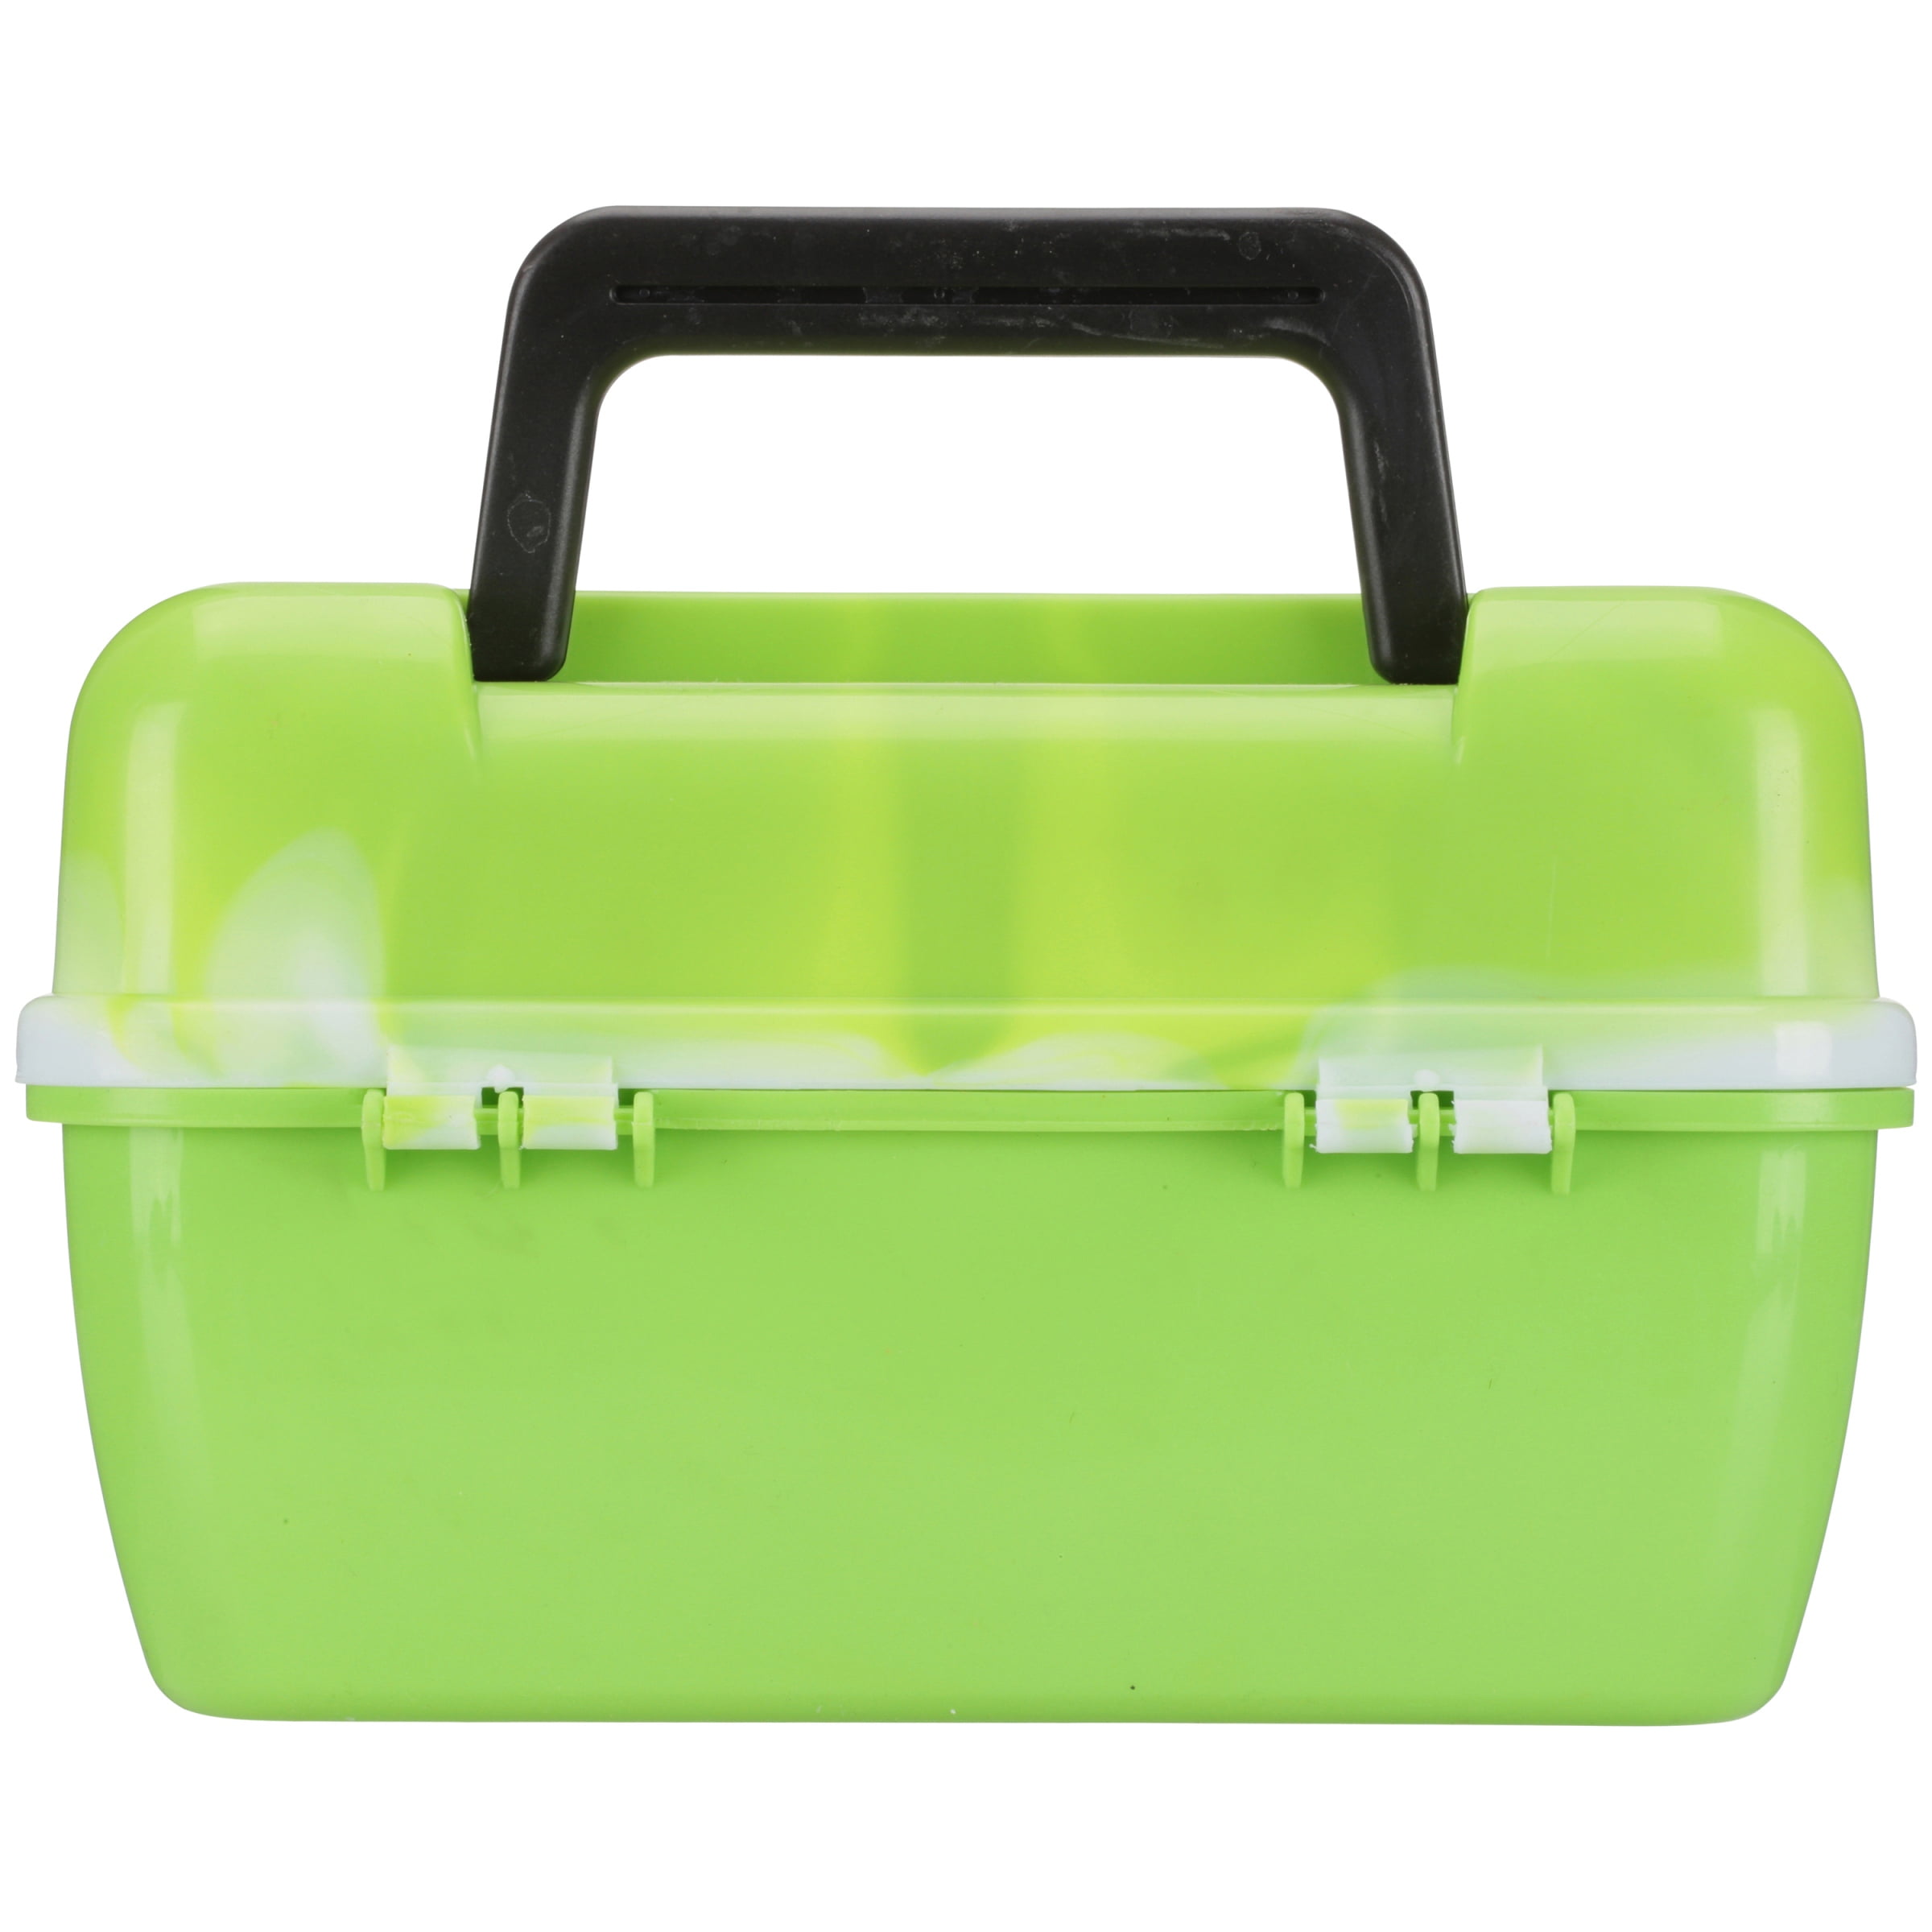 South Bend Worm Gear 88-Piece Loaded Fishing Tackle Box, Green